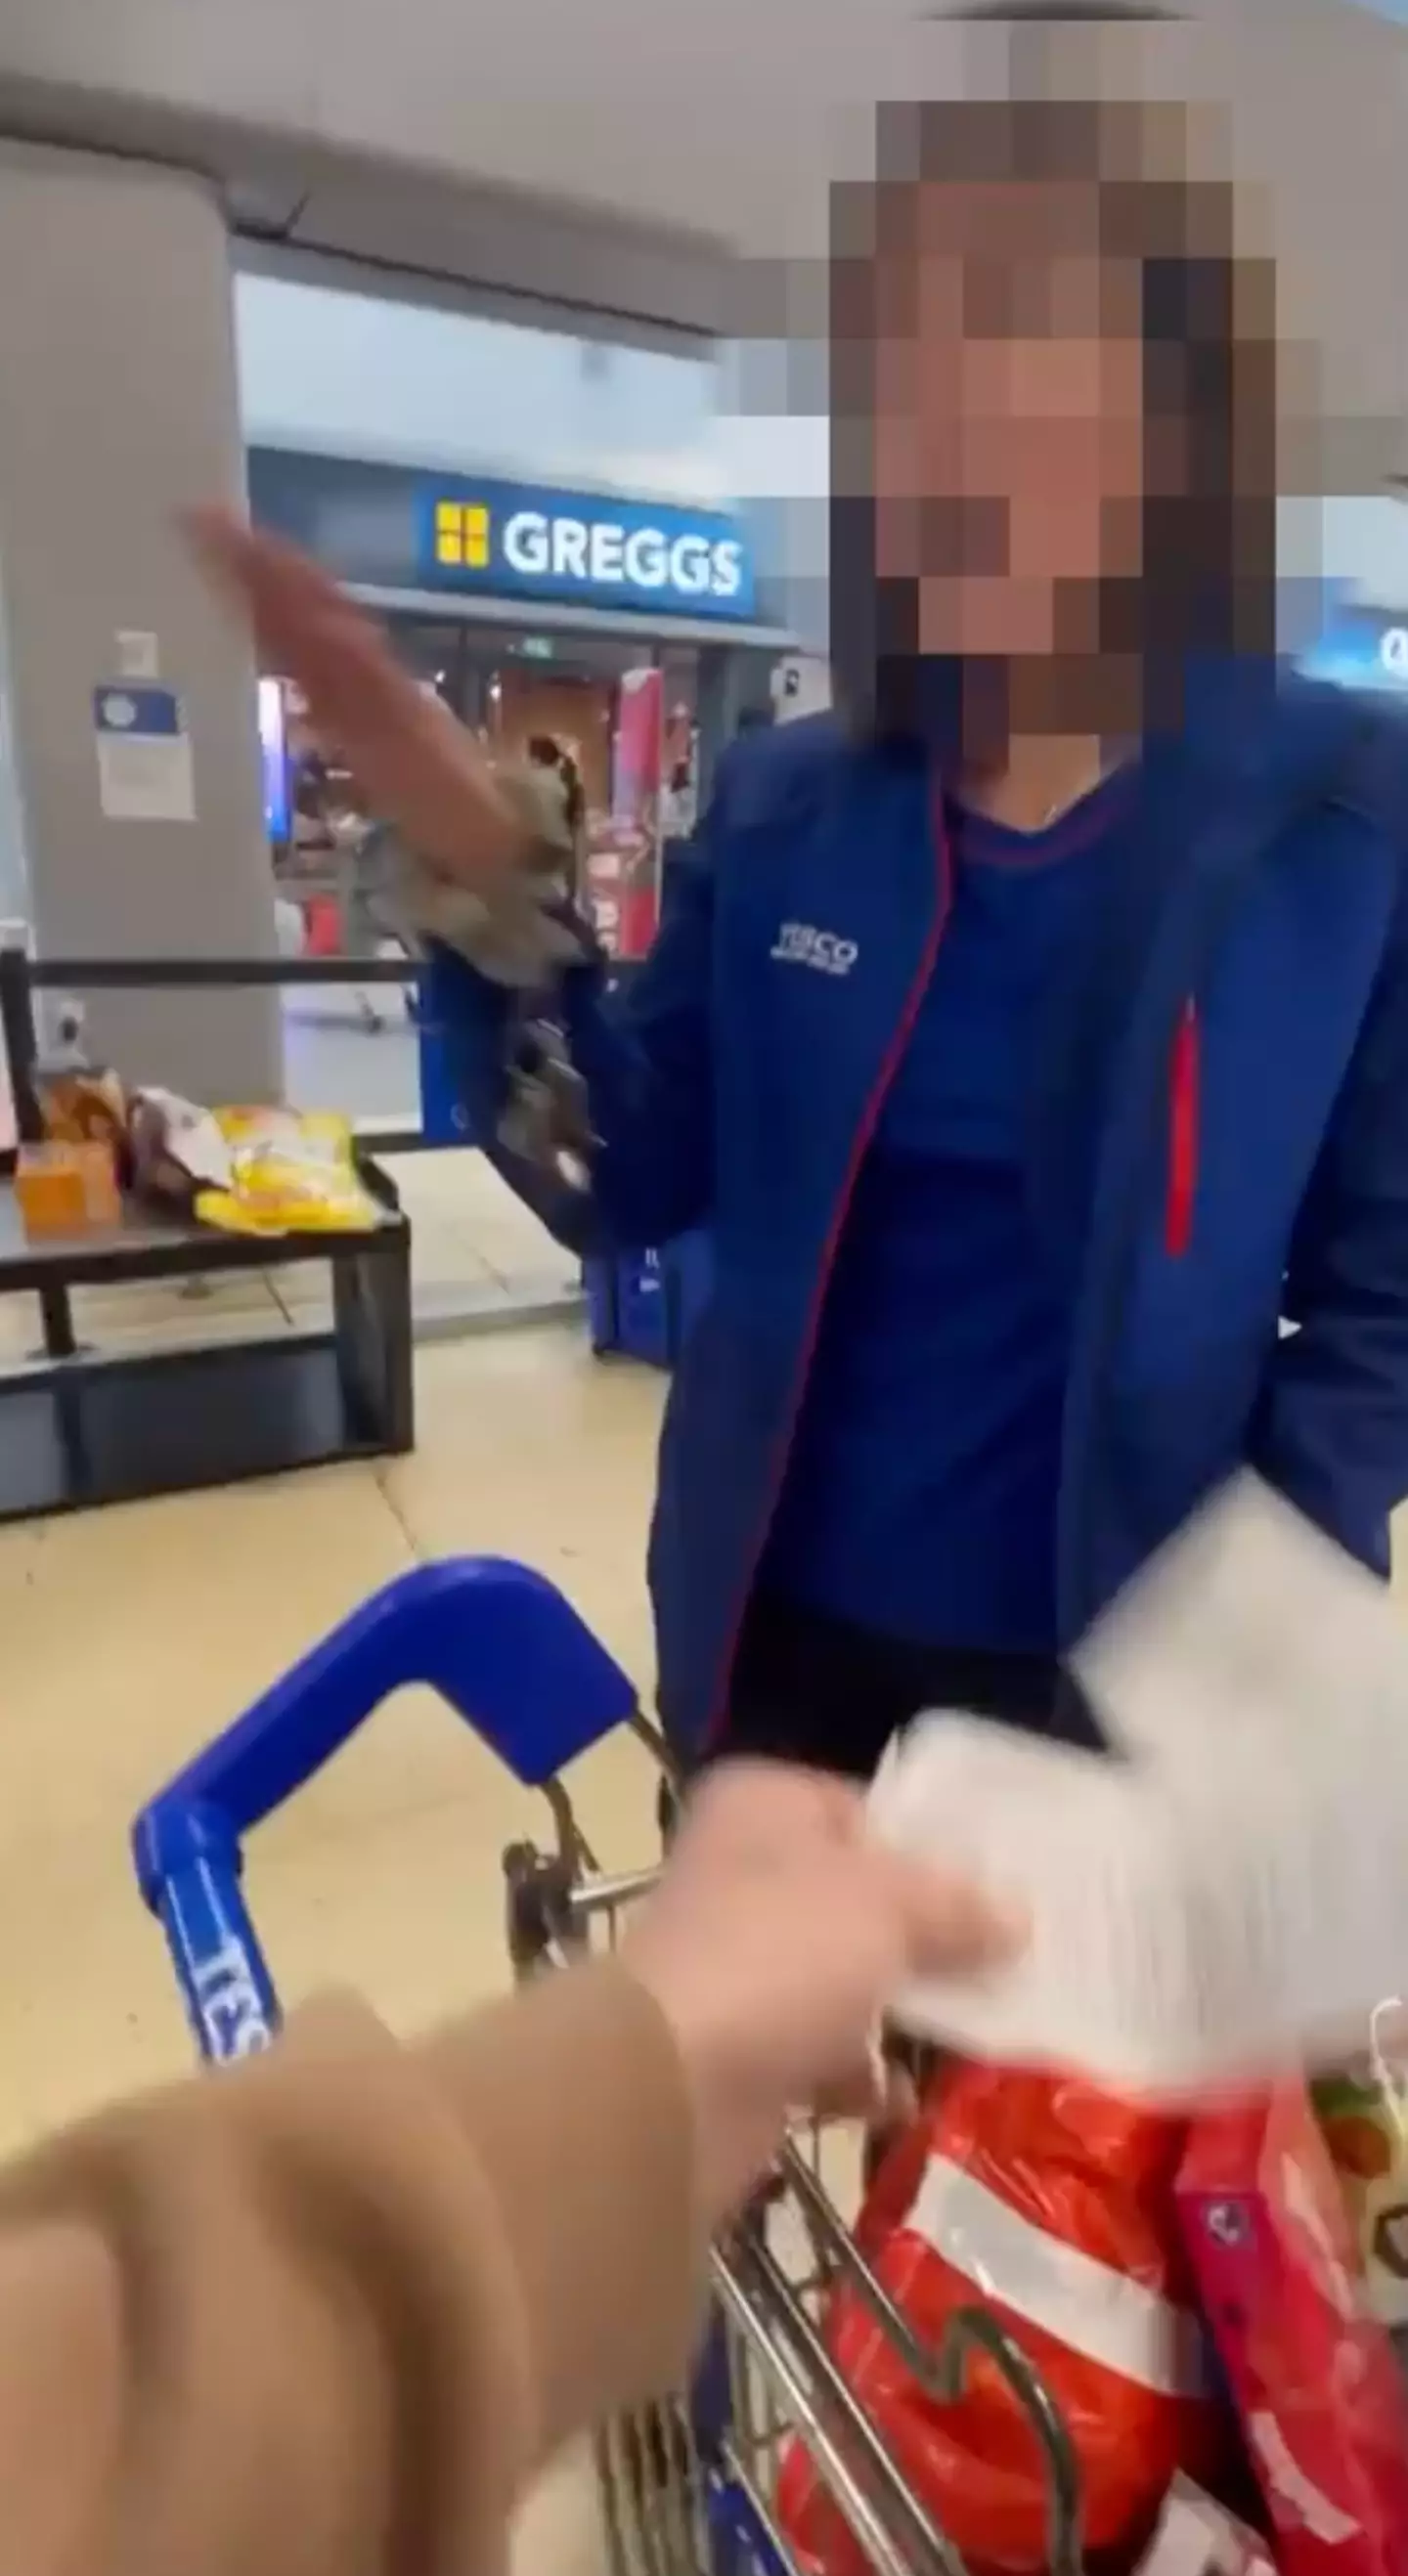 A woman in Tesco uniform tried to snatch Anne Marie's phone out of her hand.